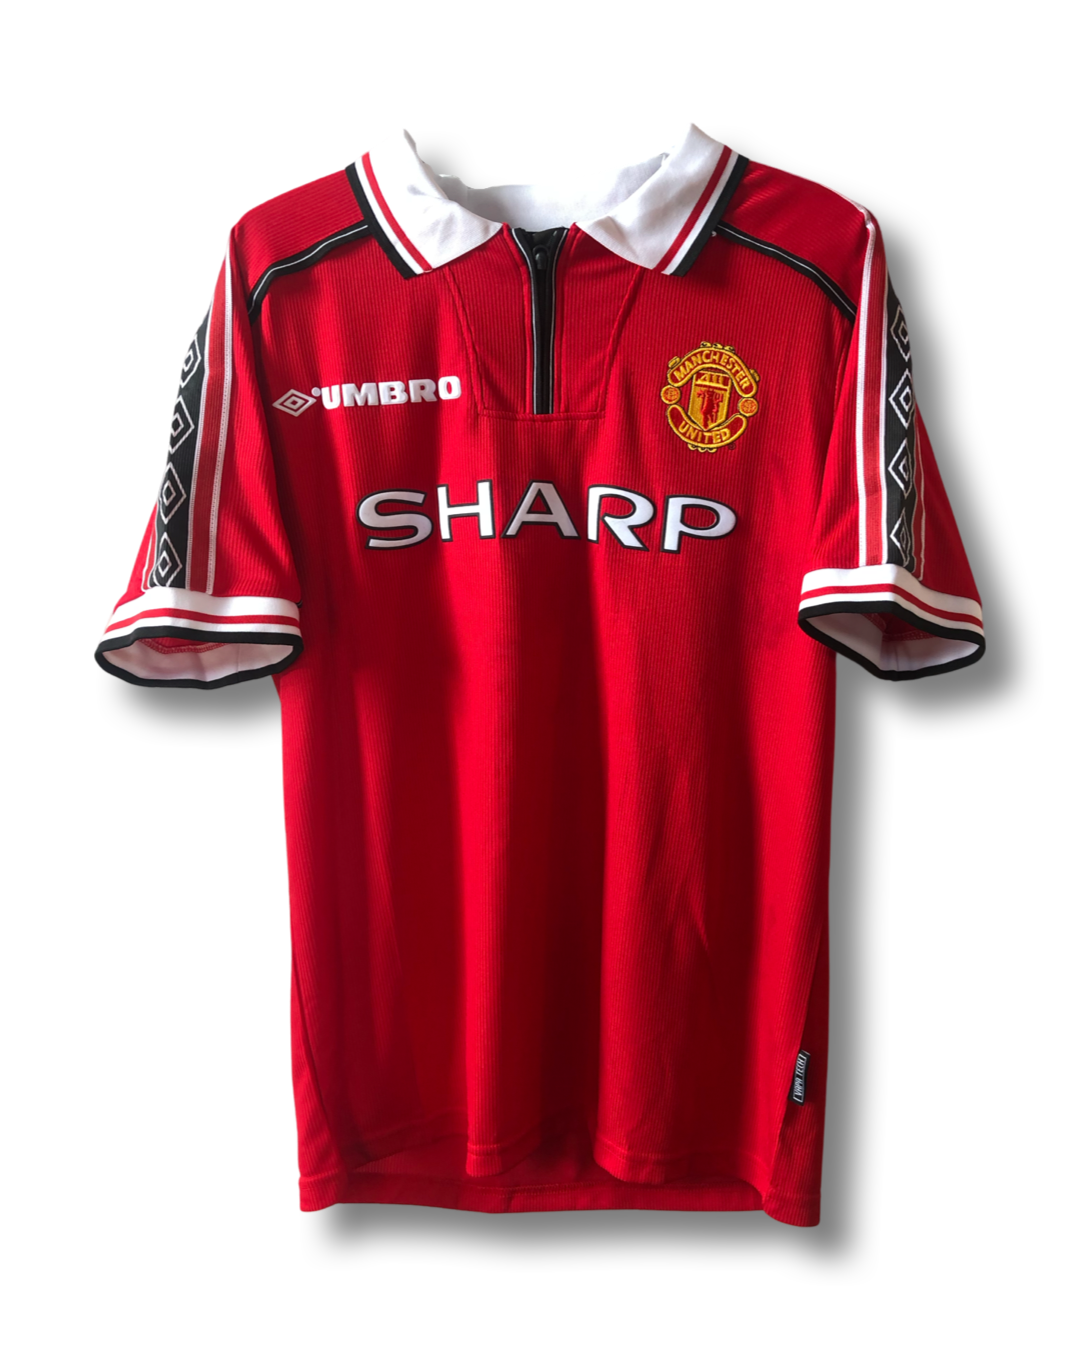 Manchester United 1998-99 'Treble' Home Shirt, #16 KEANE (Cup)